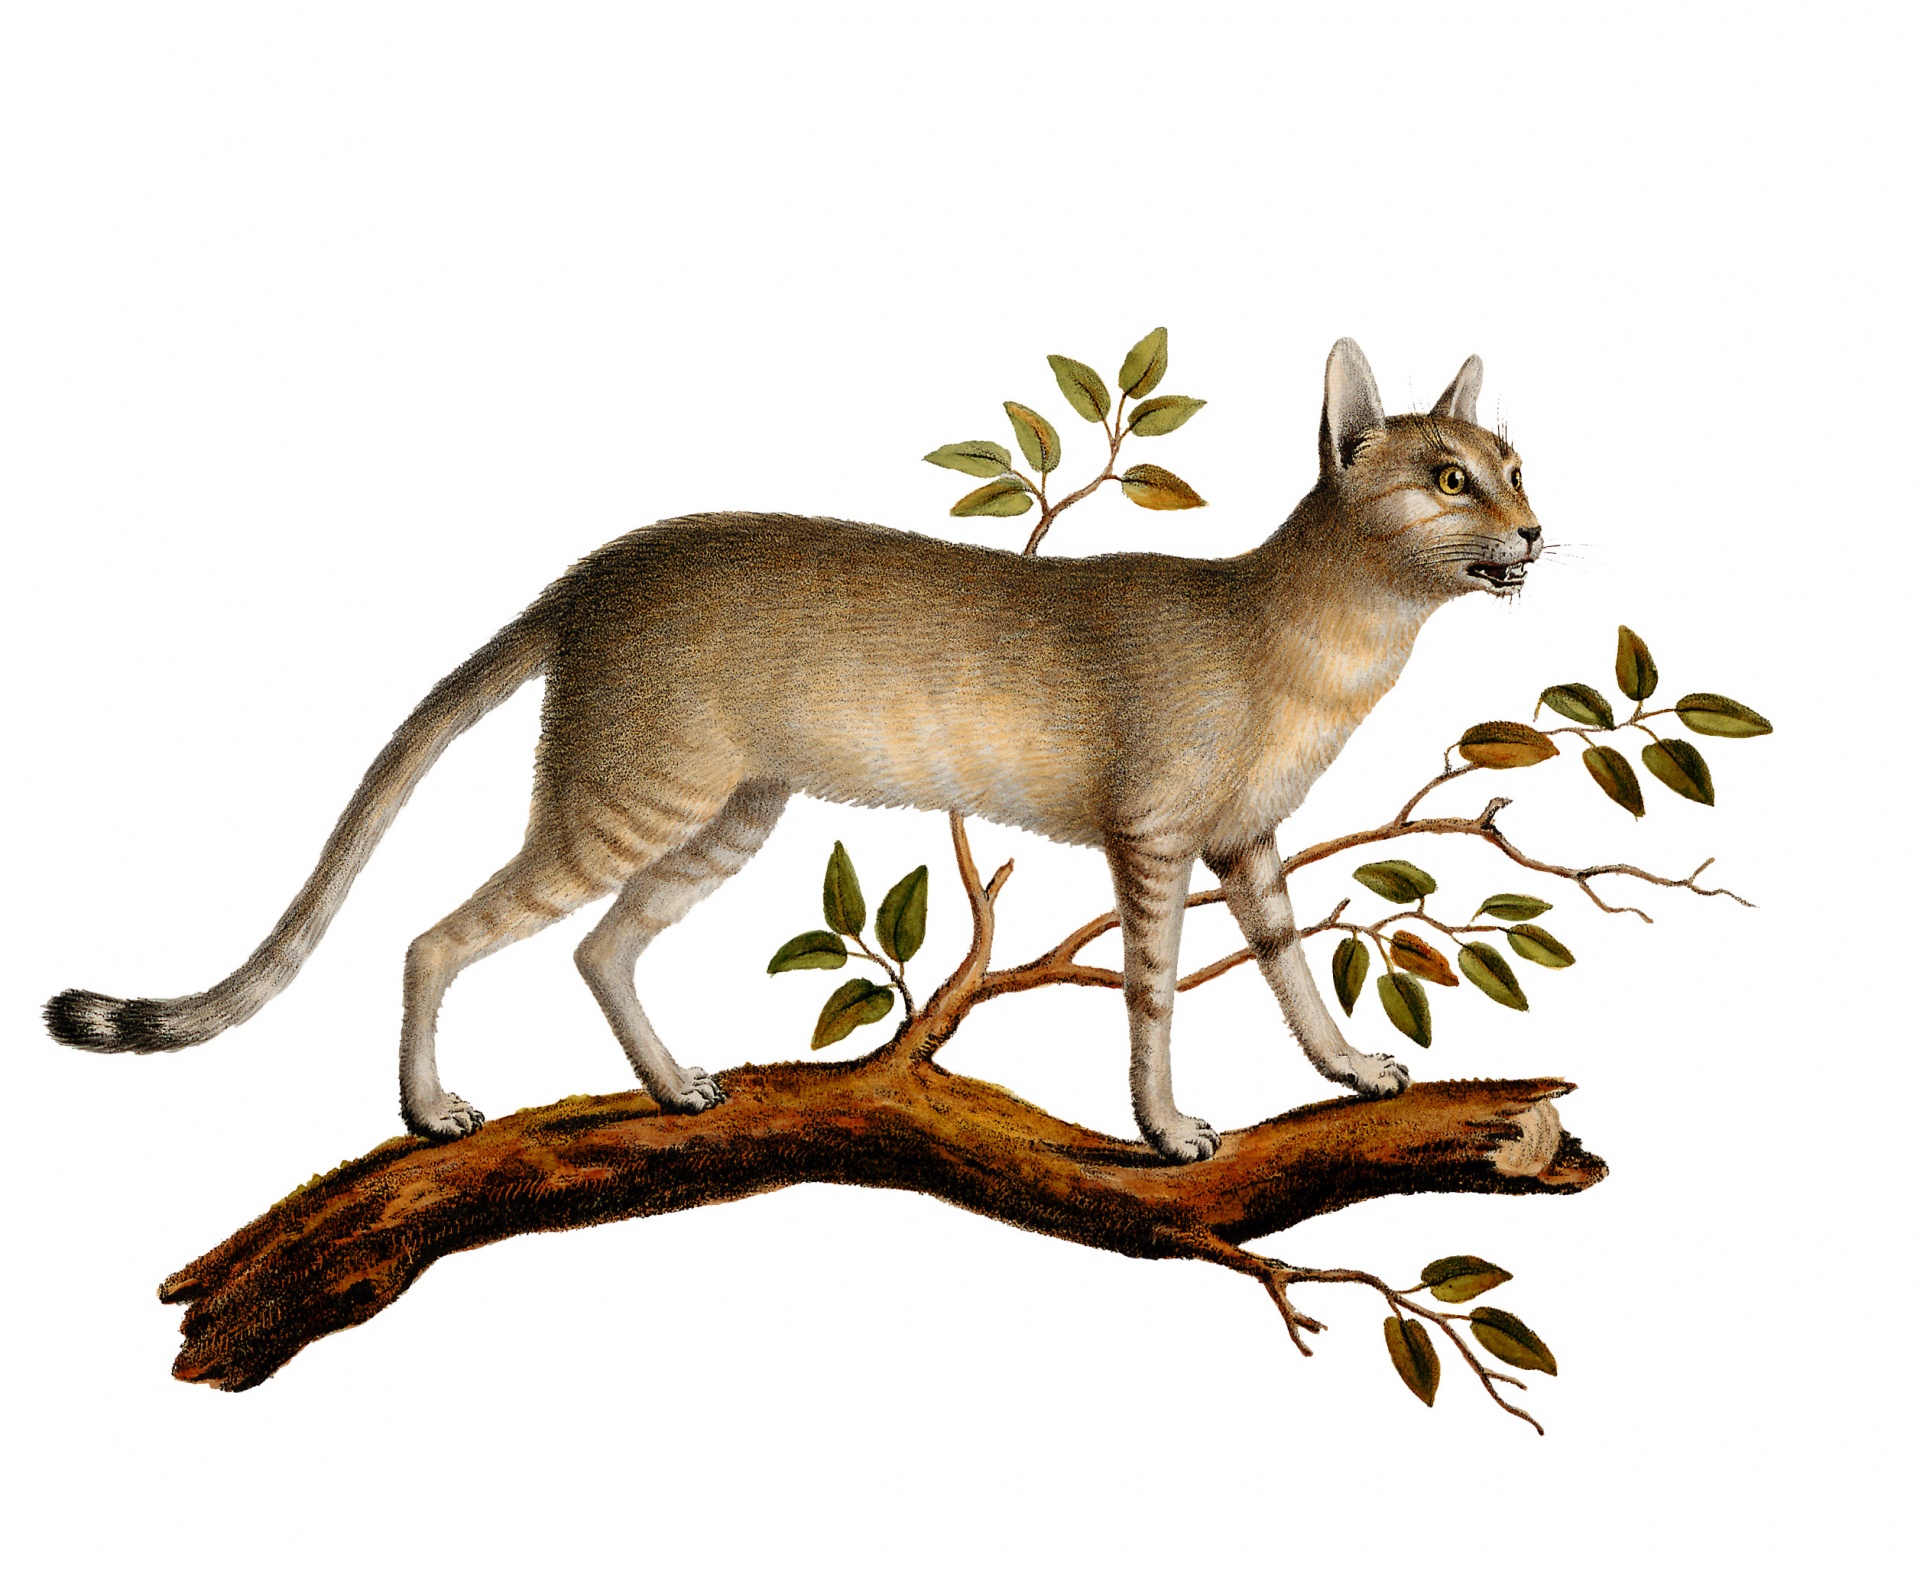 Vintage illustration of a cat in a tree from 1835 on white background